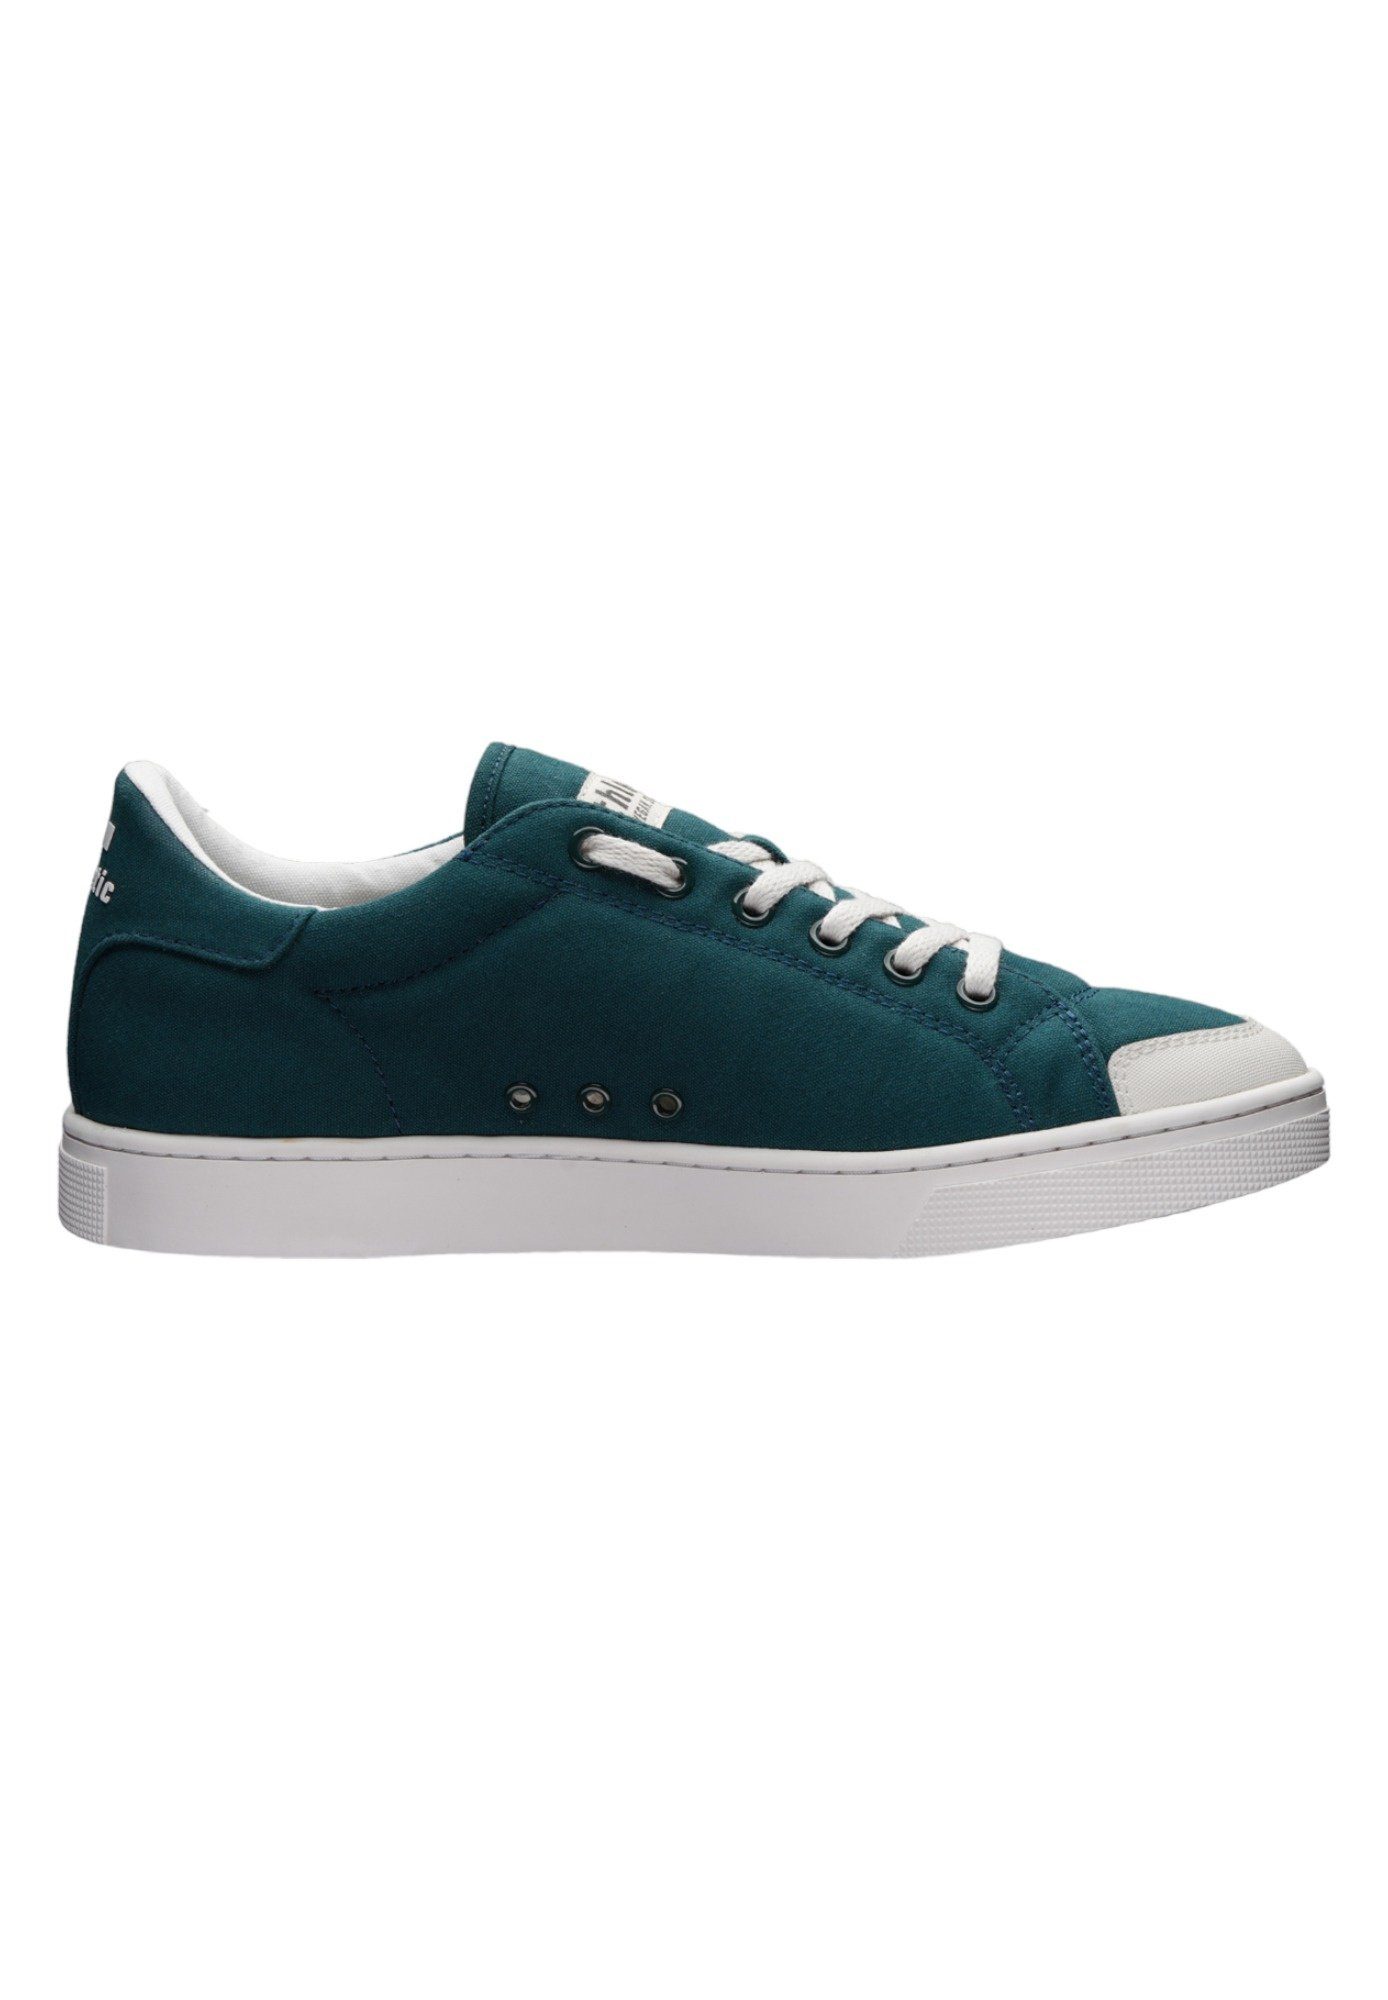 Fir - White Active Just Produkt Sneaker ETHLETIC Green Cut Fairtrade Lo Tree